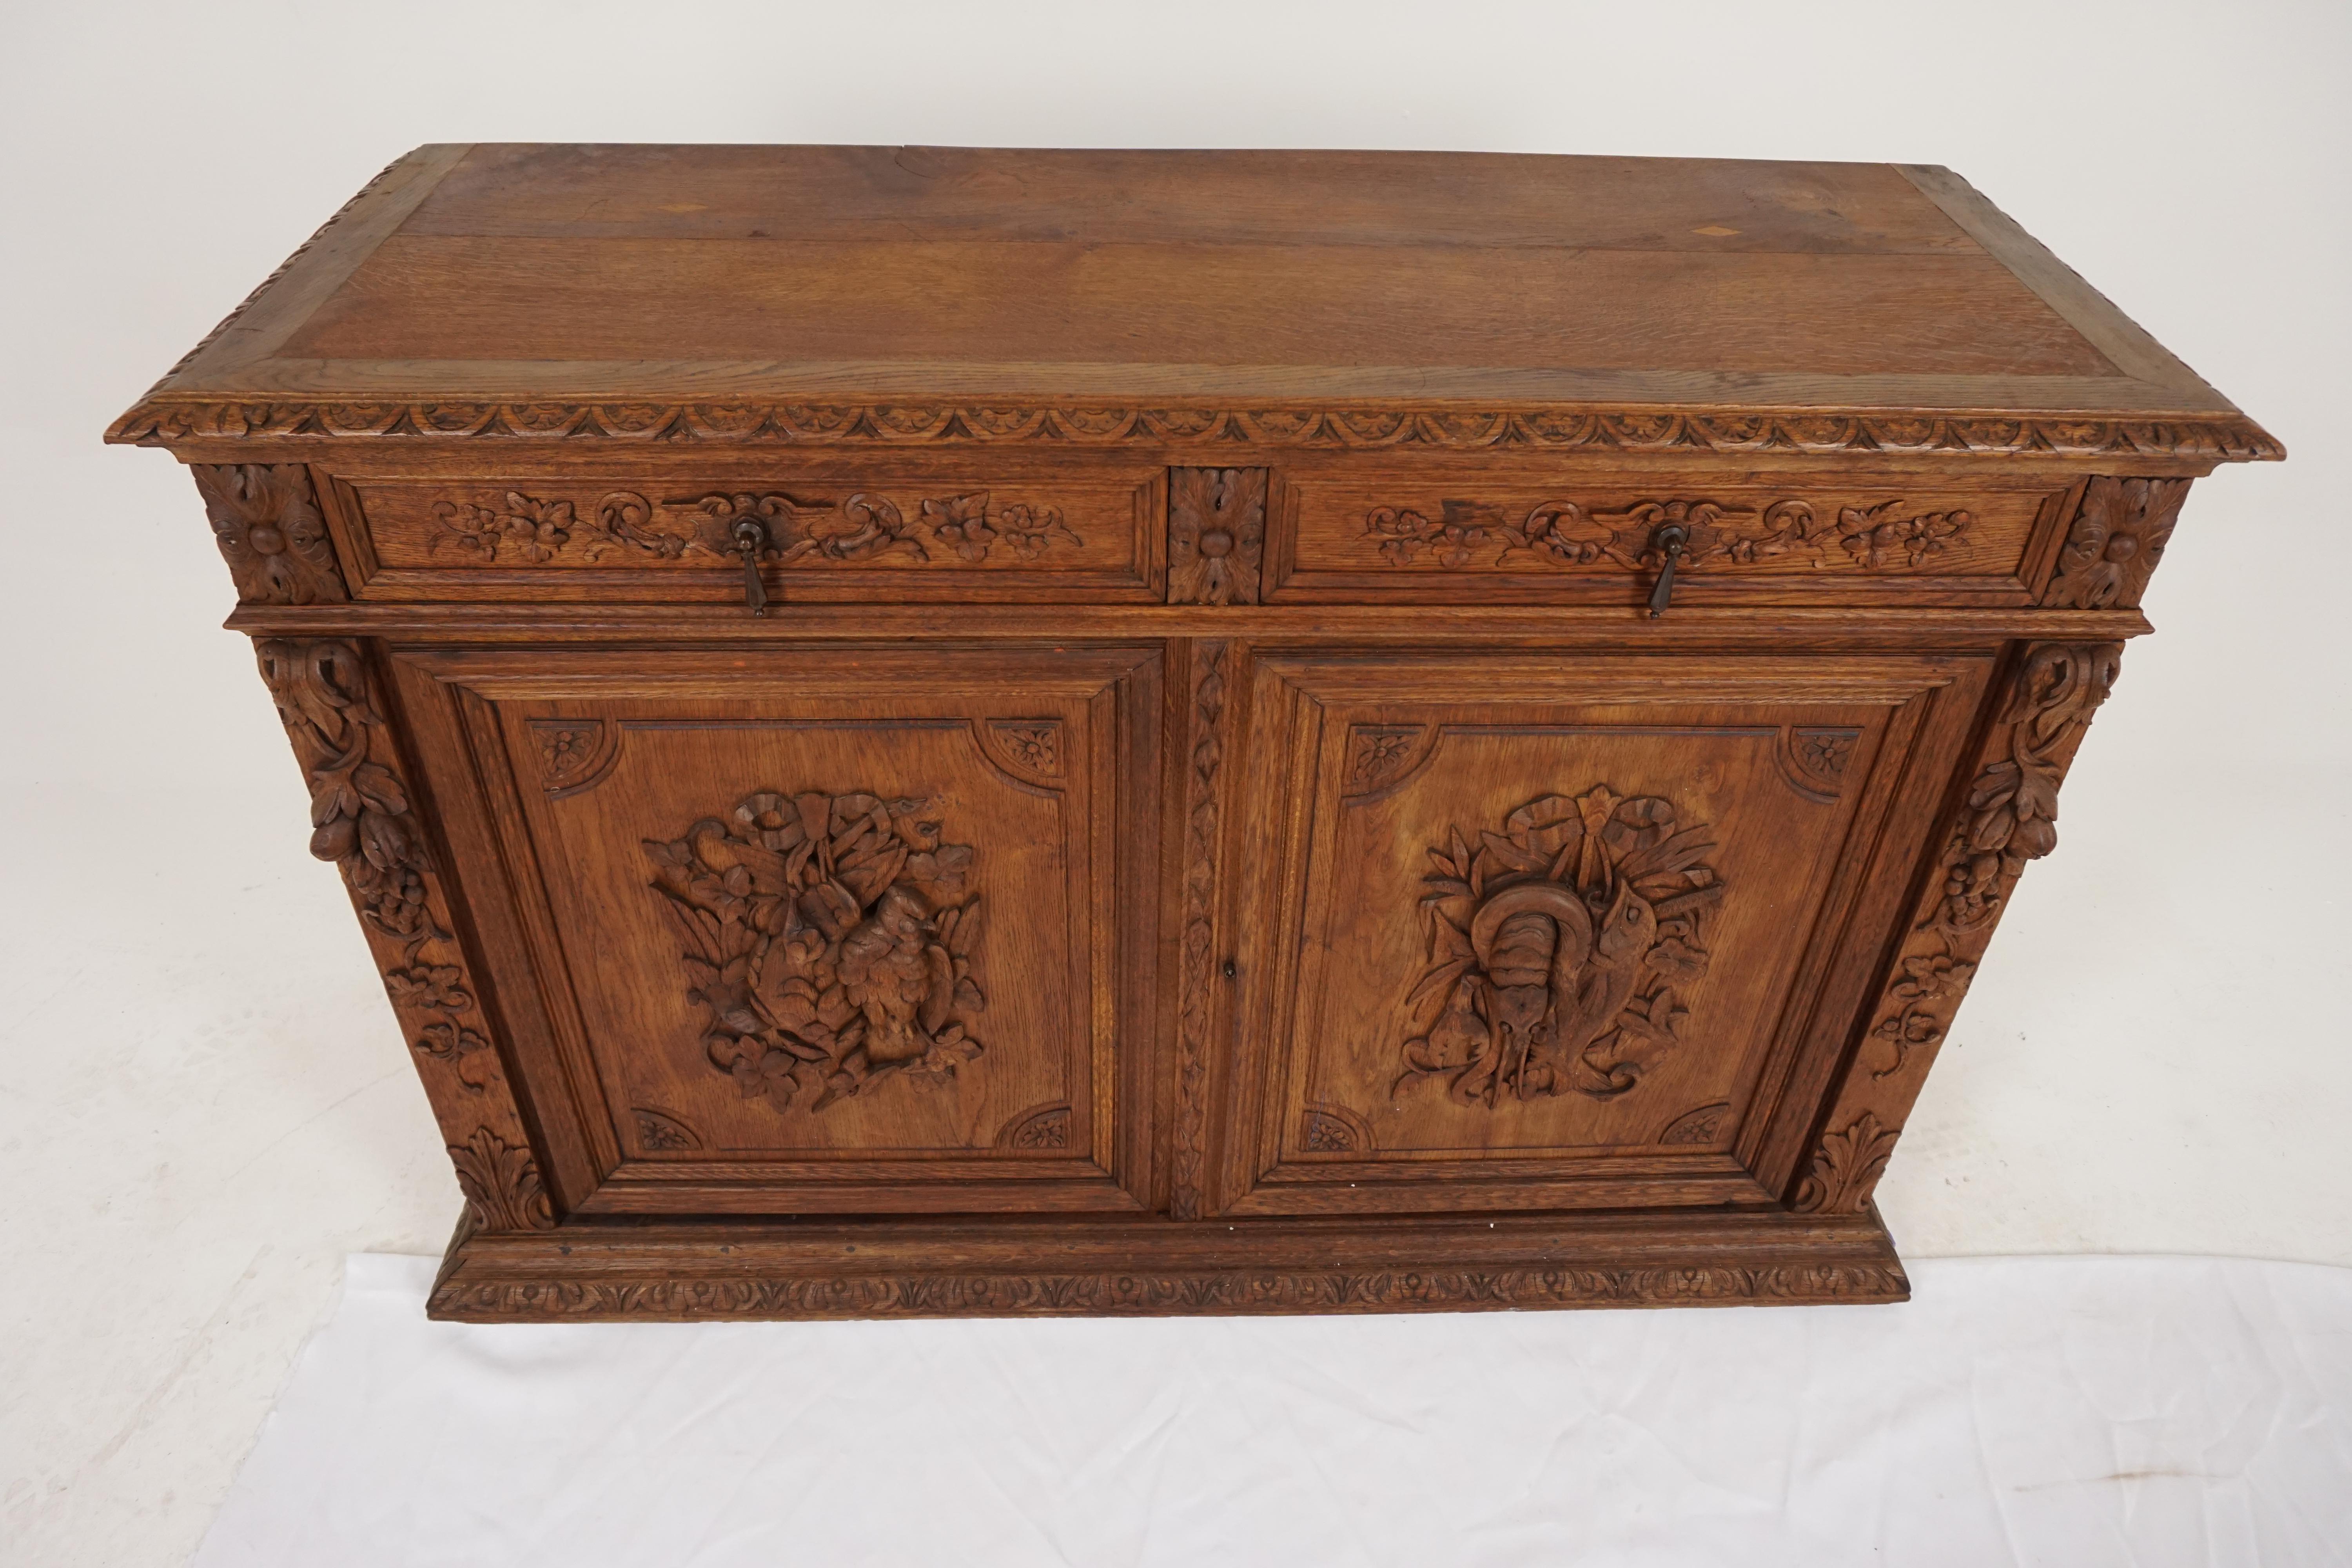 Antique heavily carved oak sideboard buffet, Scotland, 1880, B1819

Scotland 1880
Solid oak
Original finish
Rectangular oak top with carved mold edging
Pair of dove tailed carved drawers
Pair of carved paneled doors; crayfish on one side,